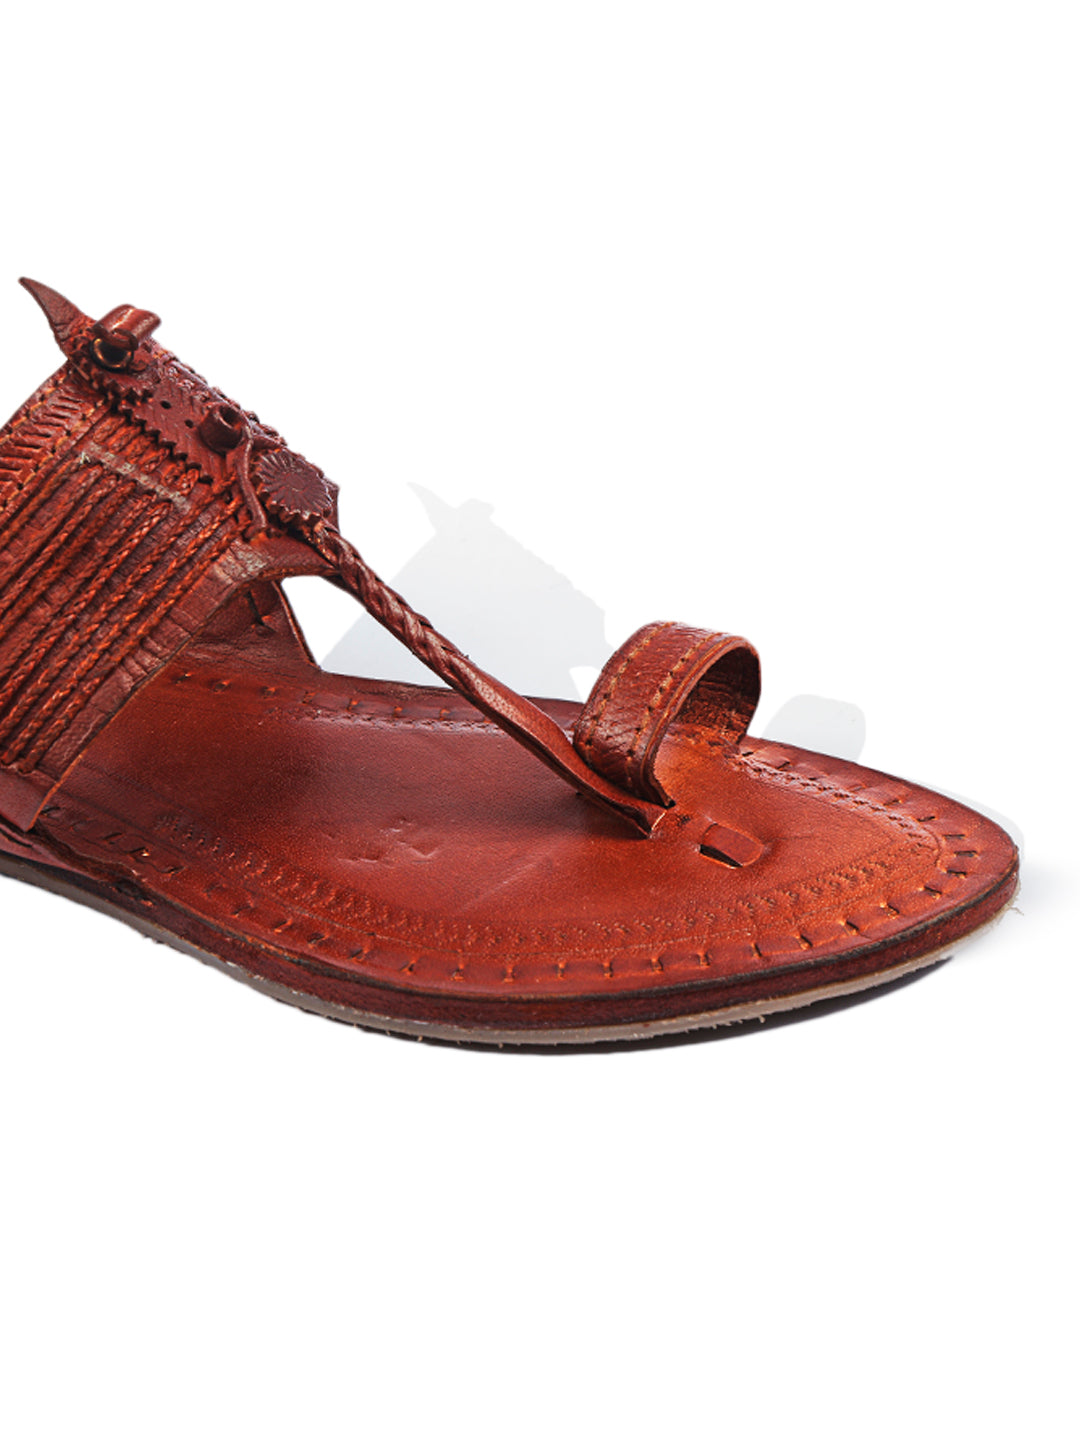 Back to our Roots -best kolhapuri chappal for women